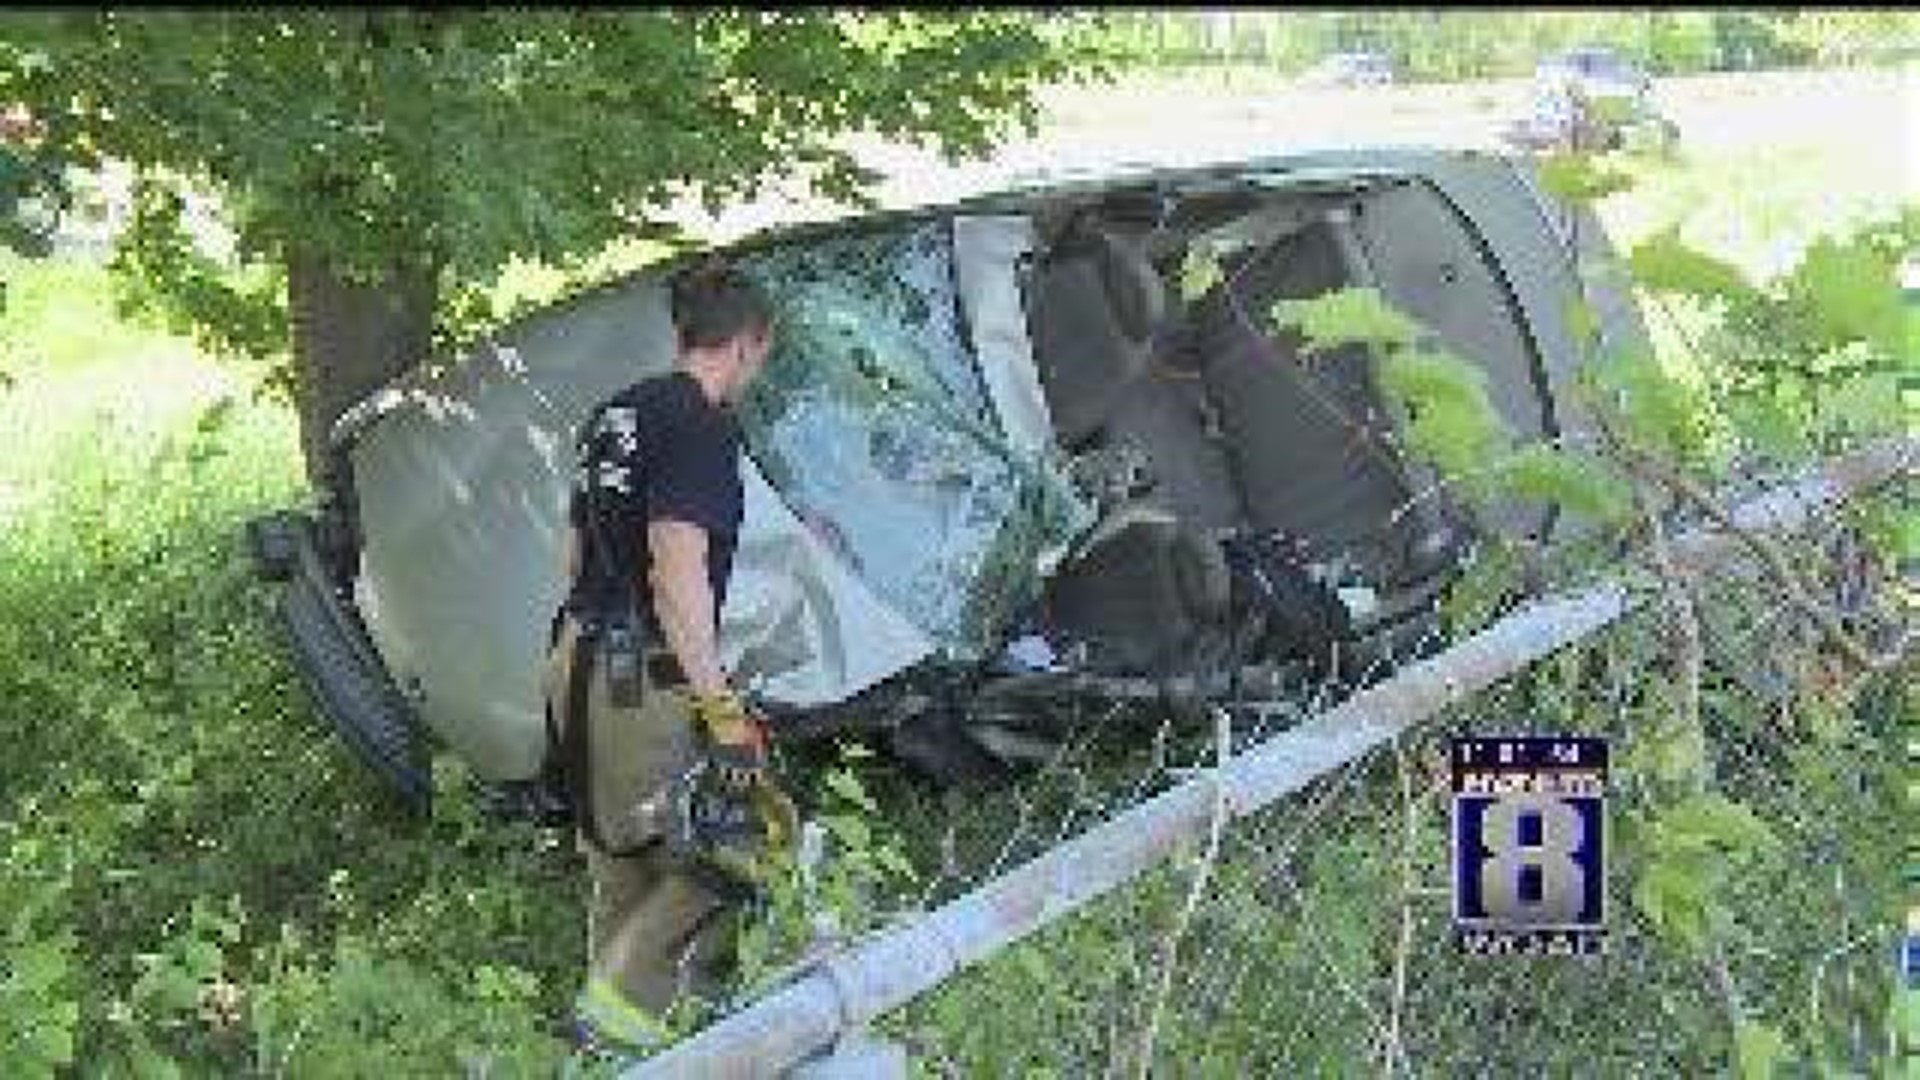 Name, Condition Released in I74 Texting Crash